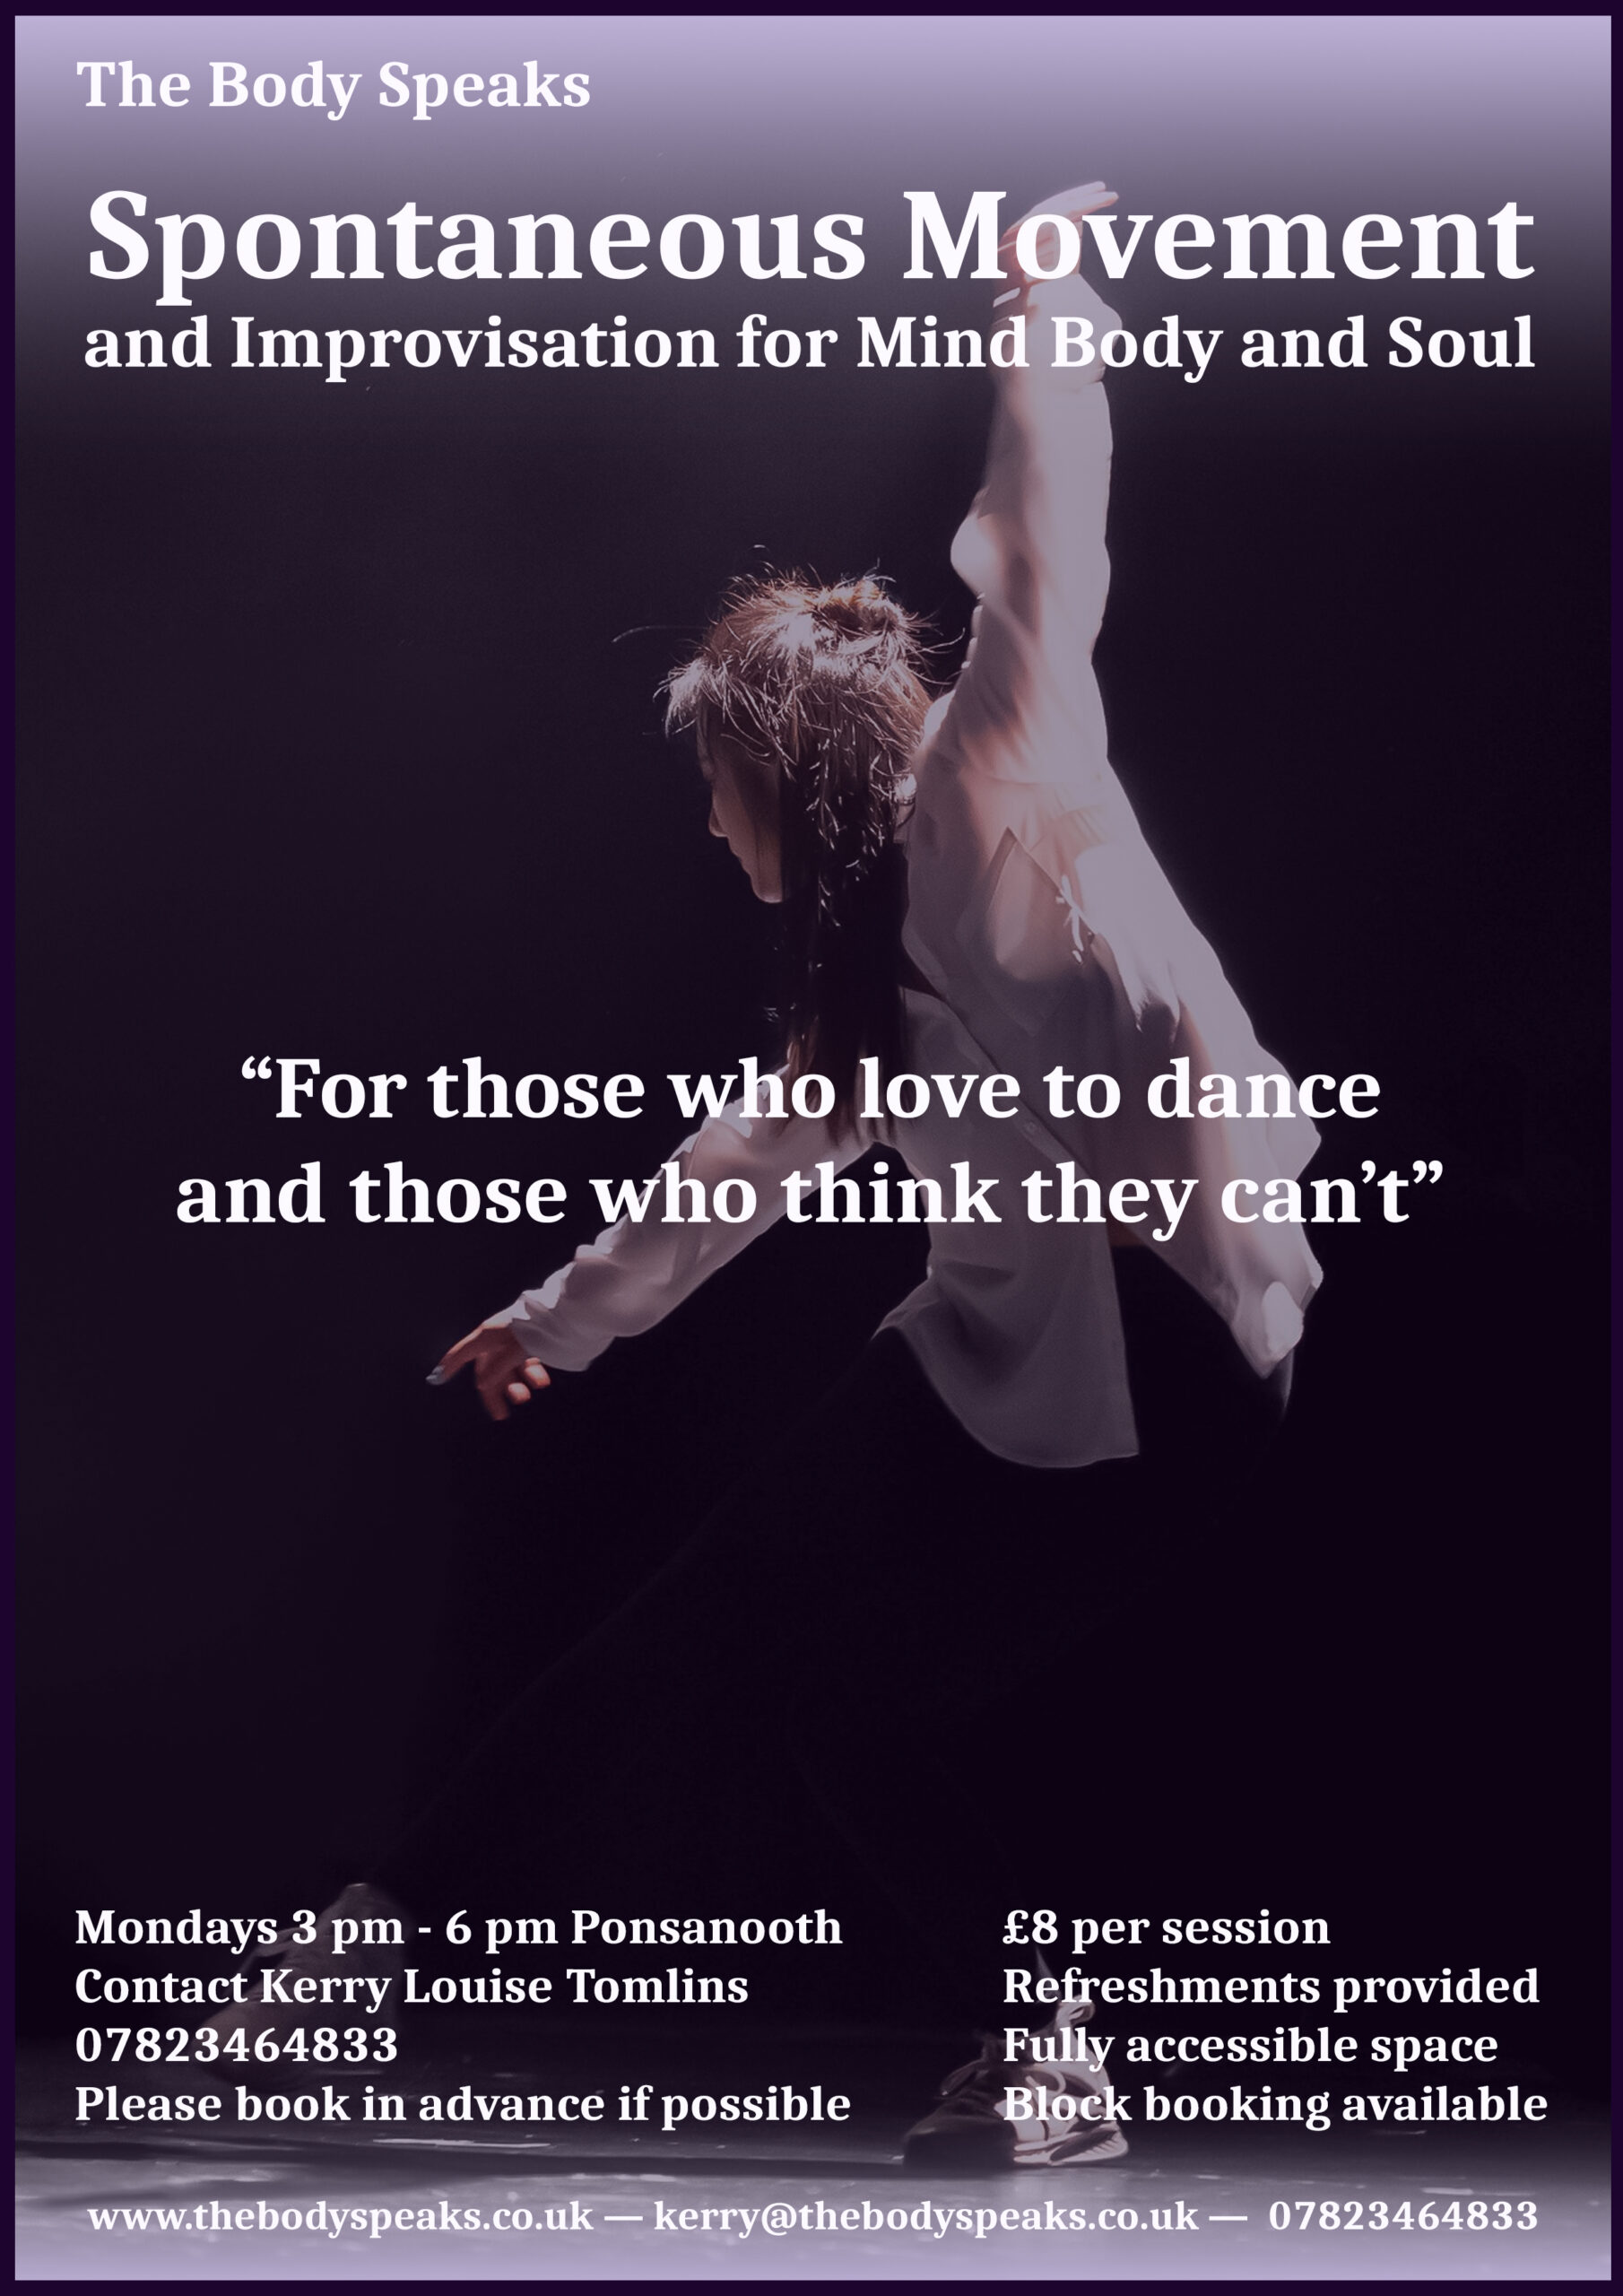 Spontaneous Movement and Improvisation for Mind Body and Soul
“For those who love to dance
and those who think they can’t”